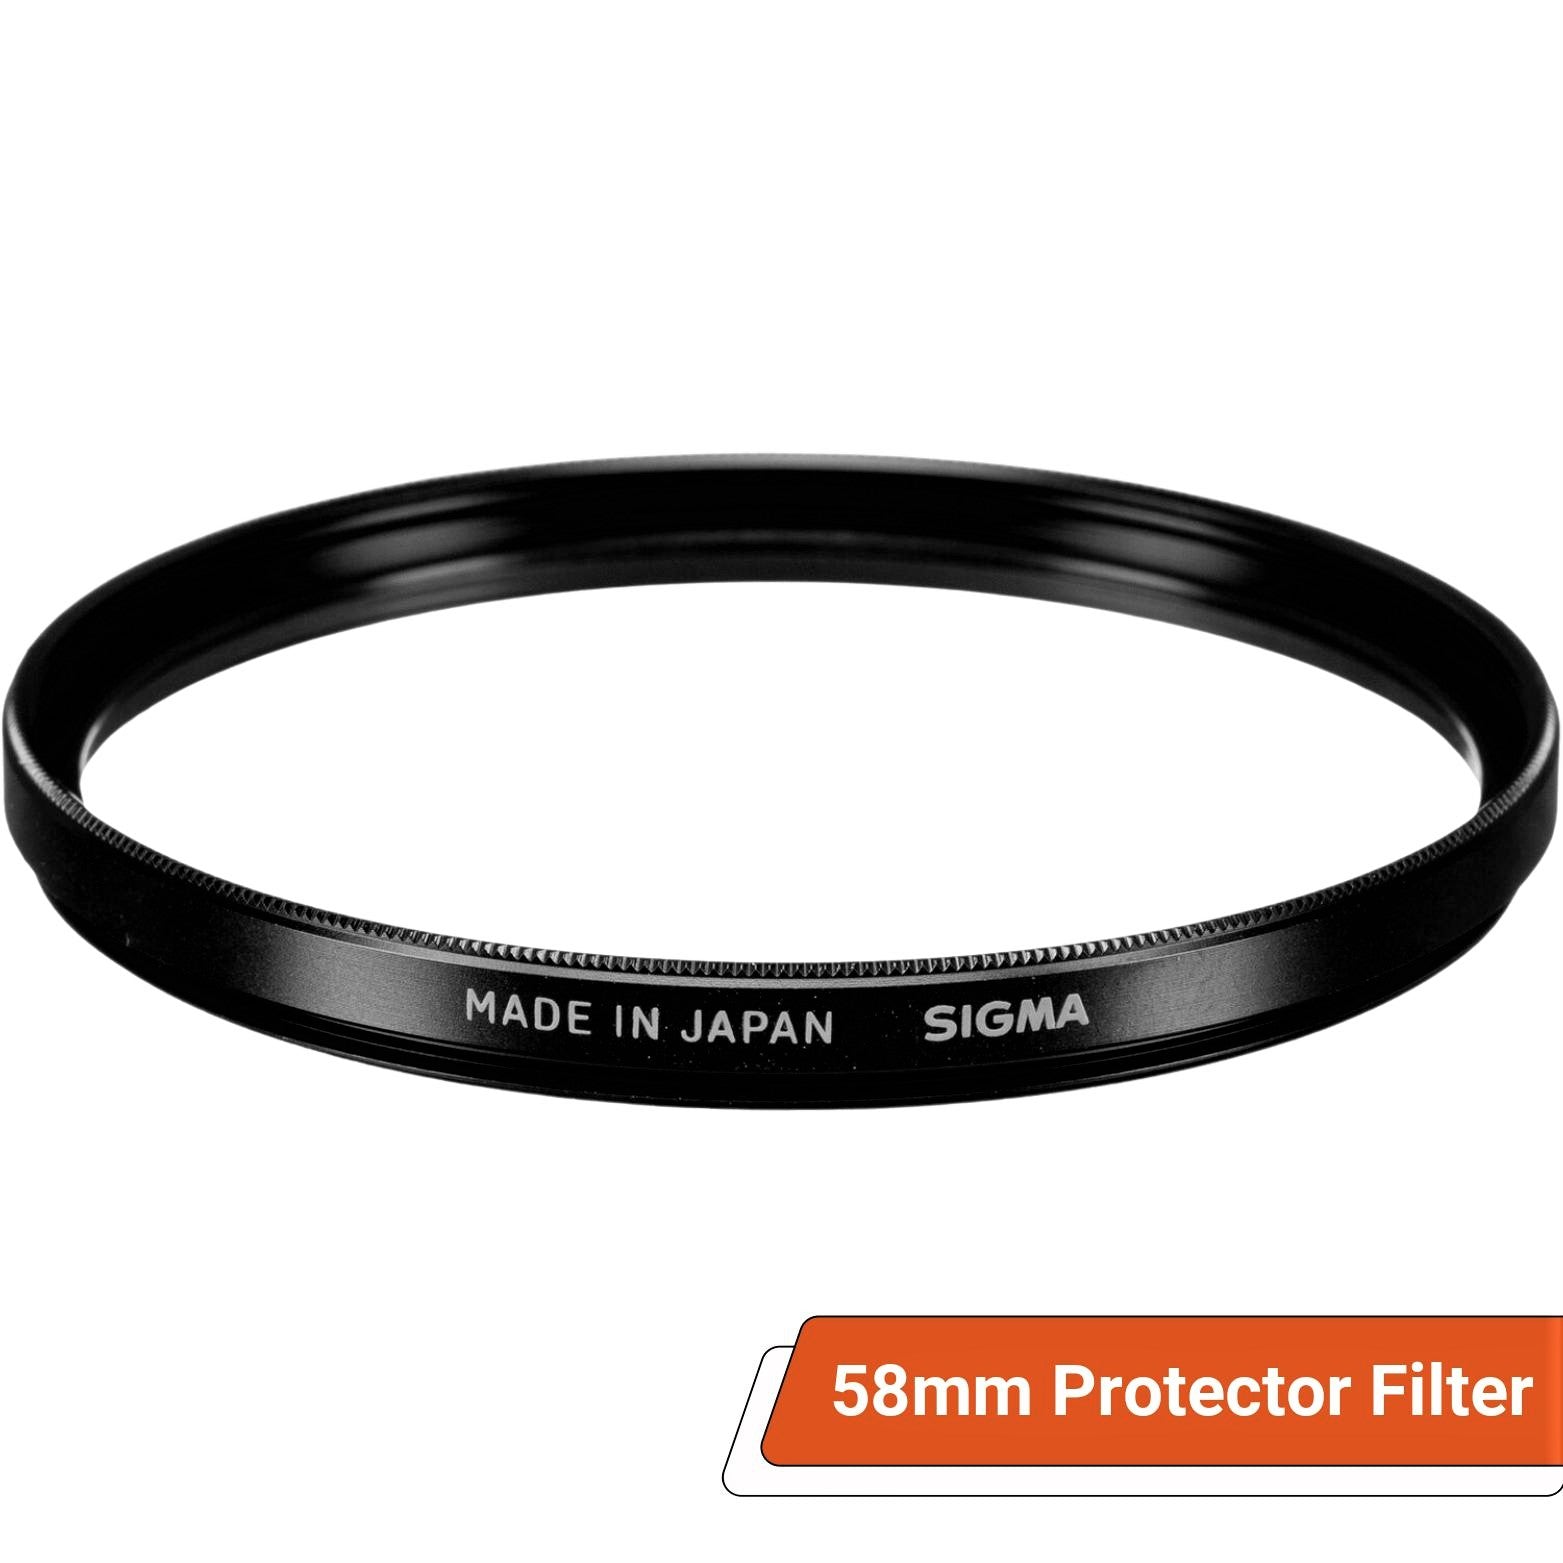 Sigma 58mm Protector Filter